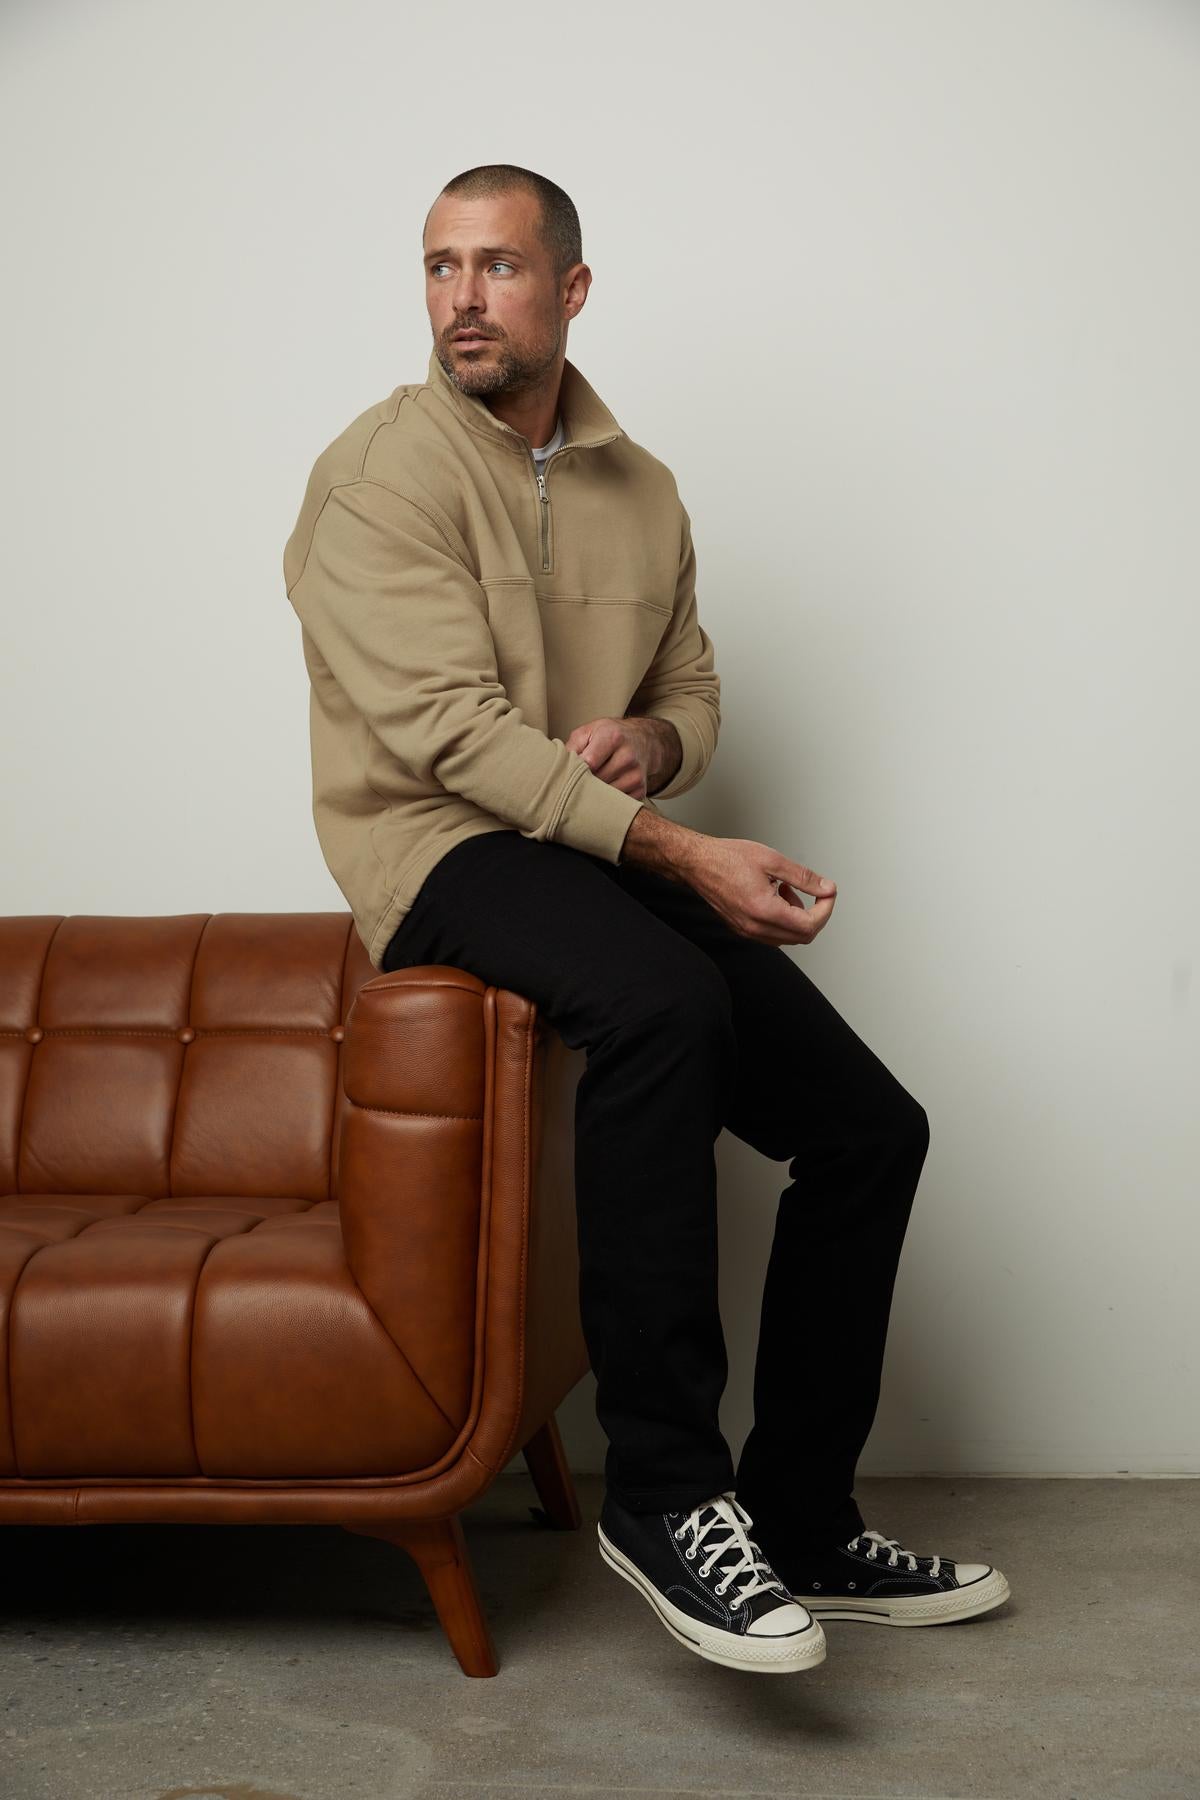   A man sitting on a brown leather couch, wearing a BOSCO QUARTER-ZIP SWEATSHIRT by Velvet by Graham & Spencer. 